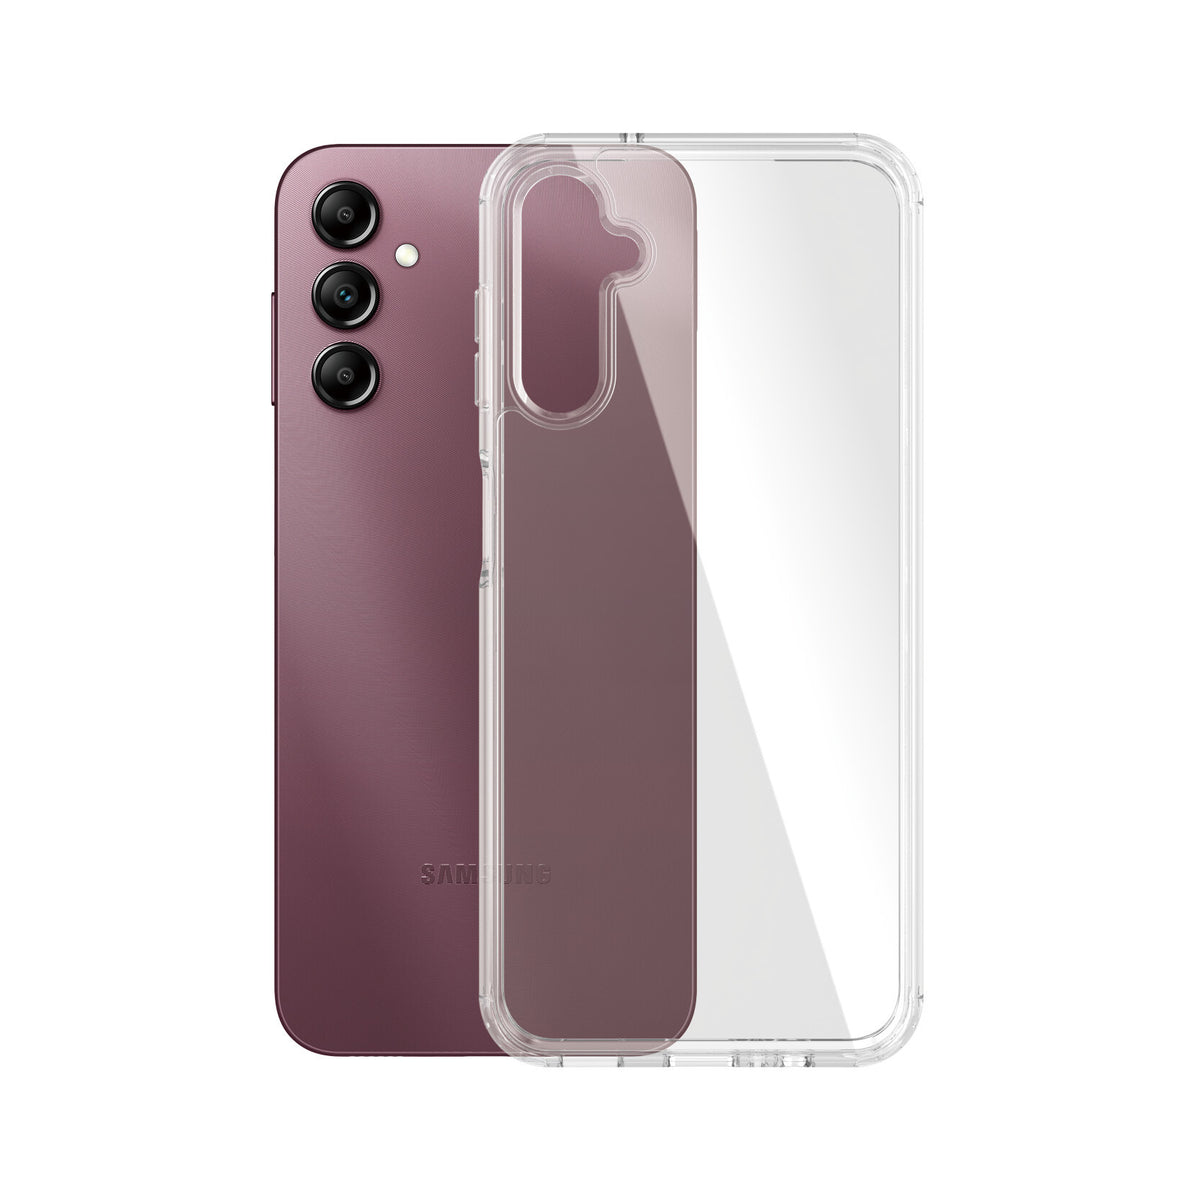 PanzerGlass ® HardCase for Galaxy A14 / A14 (5G) in Transparent